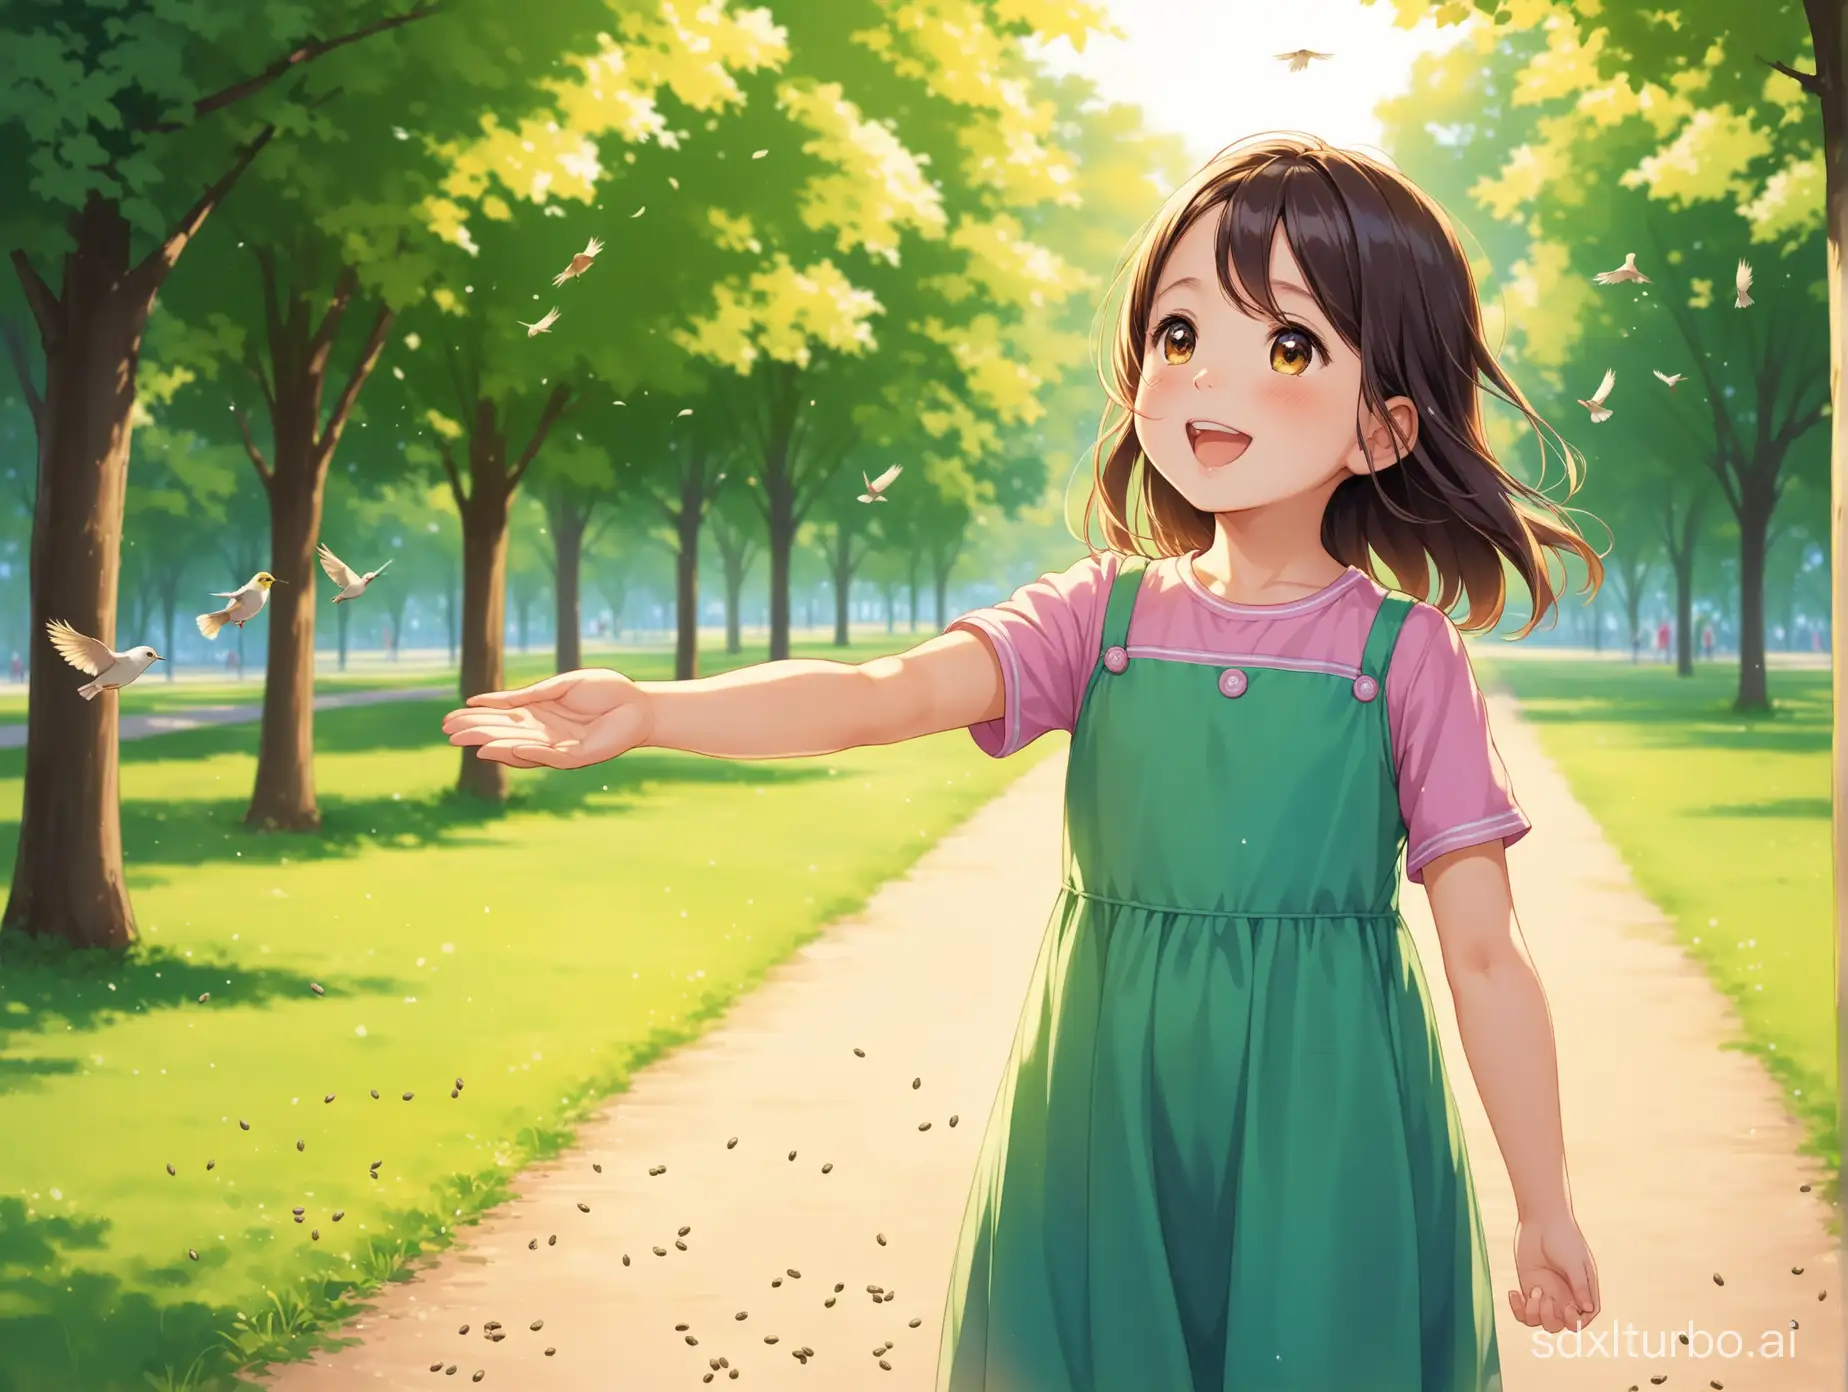 a girl child about 8 years old . everyday wear,stand.joyfully waves her hand to scatter the birdseed  in the park